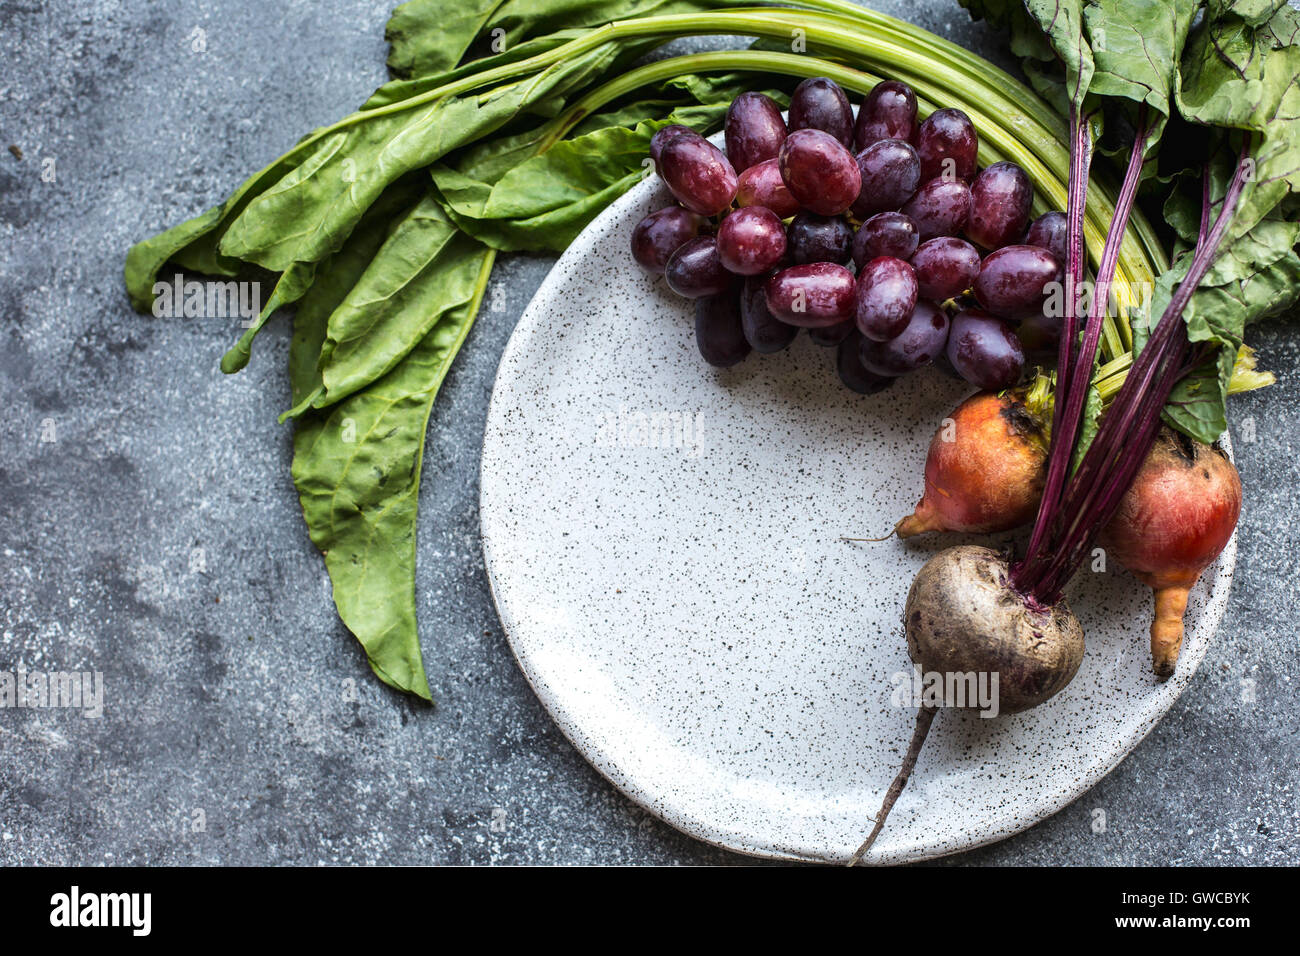 Freshly picked beets and red grapes are photographed from the top view. Stock Photo